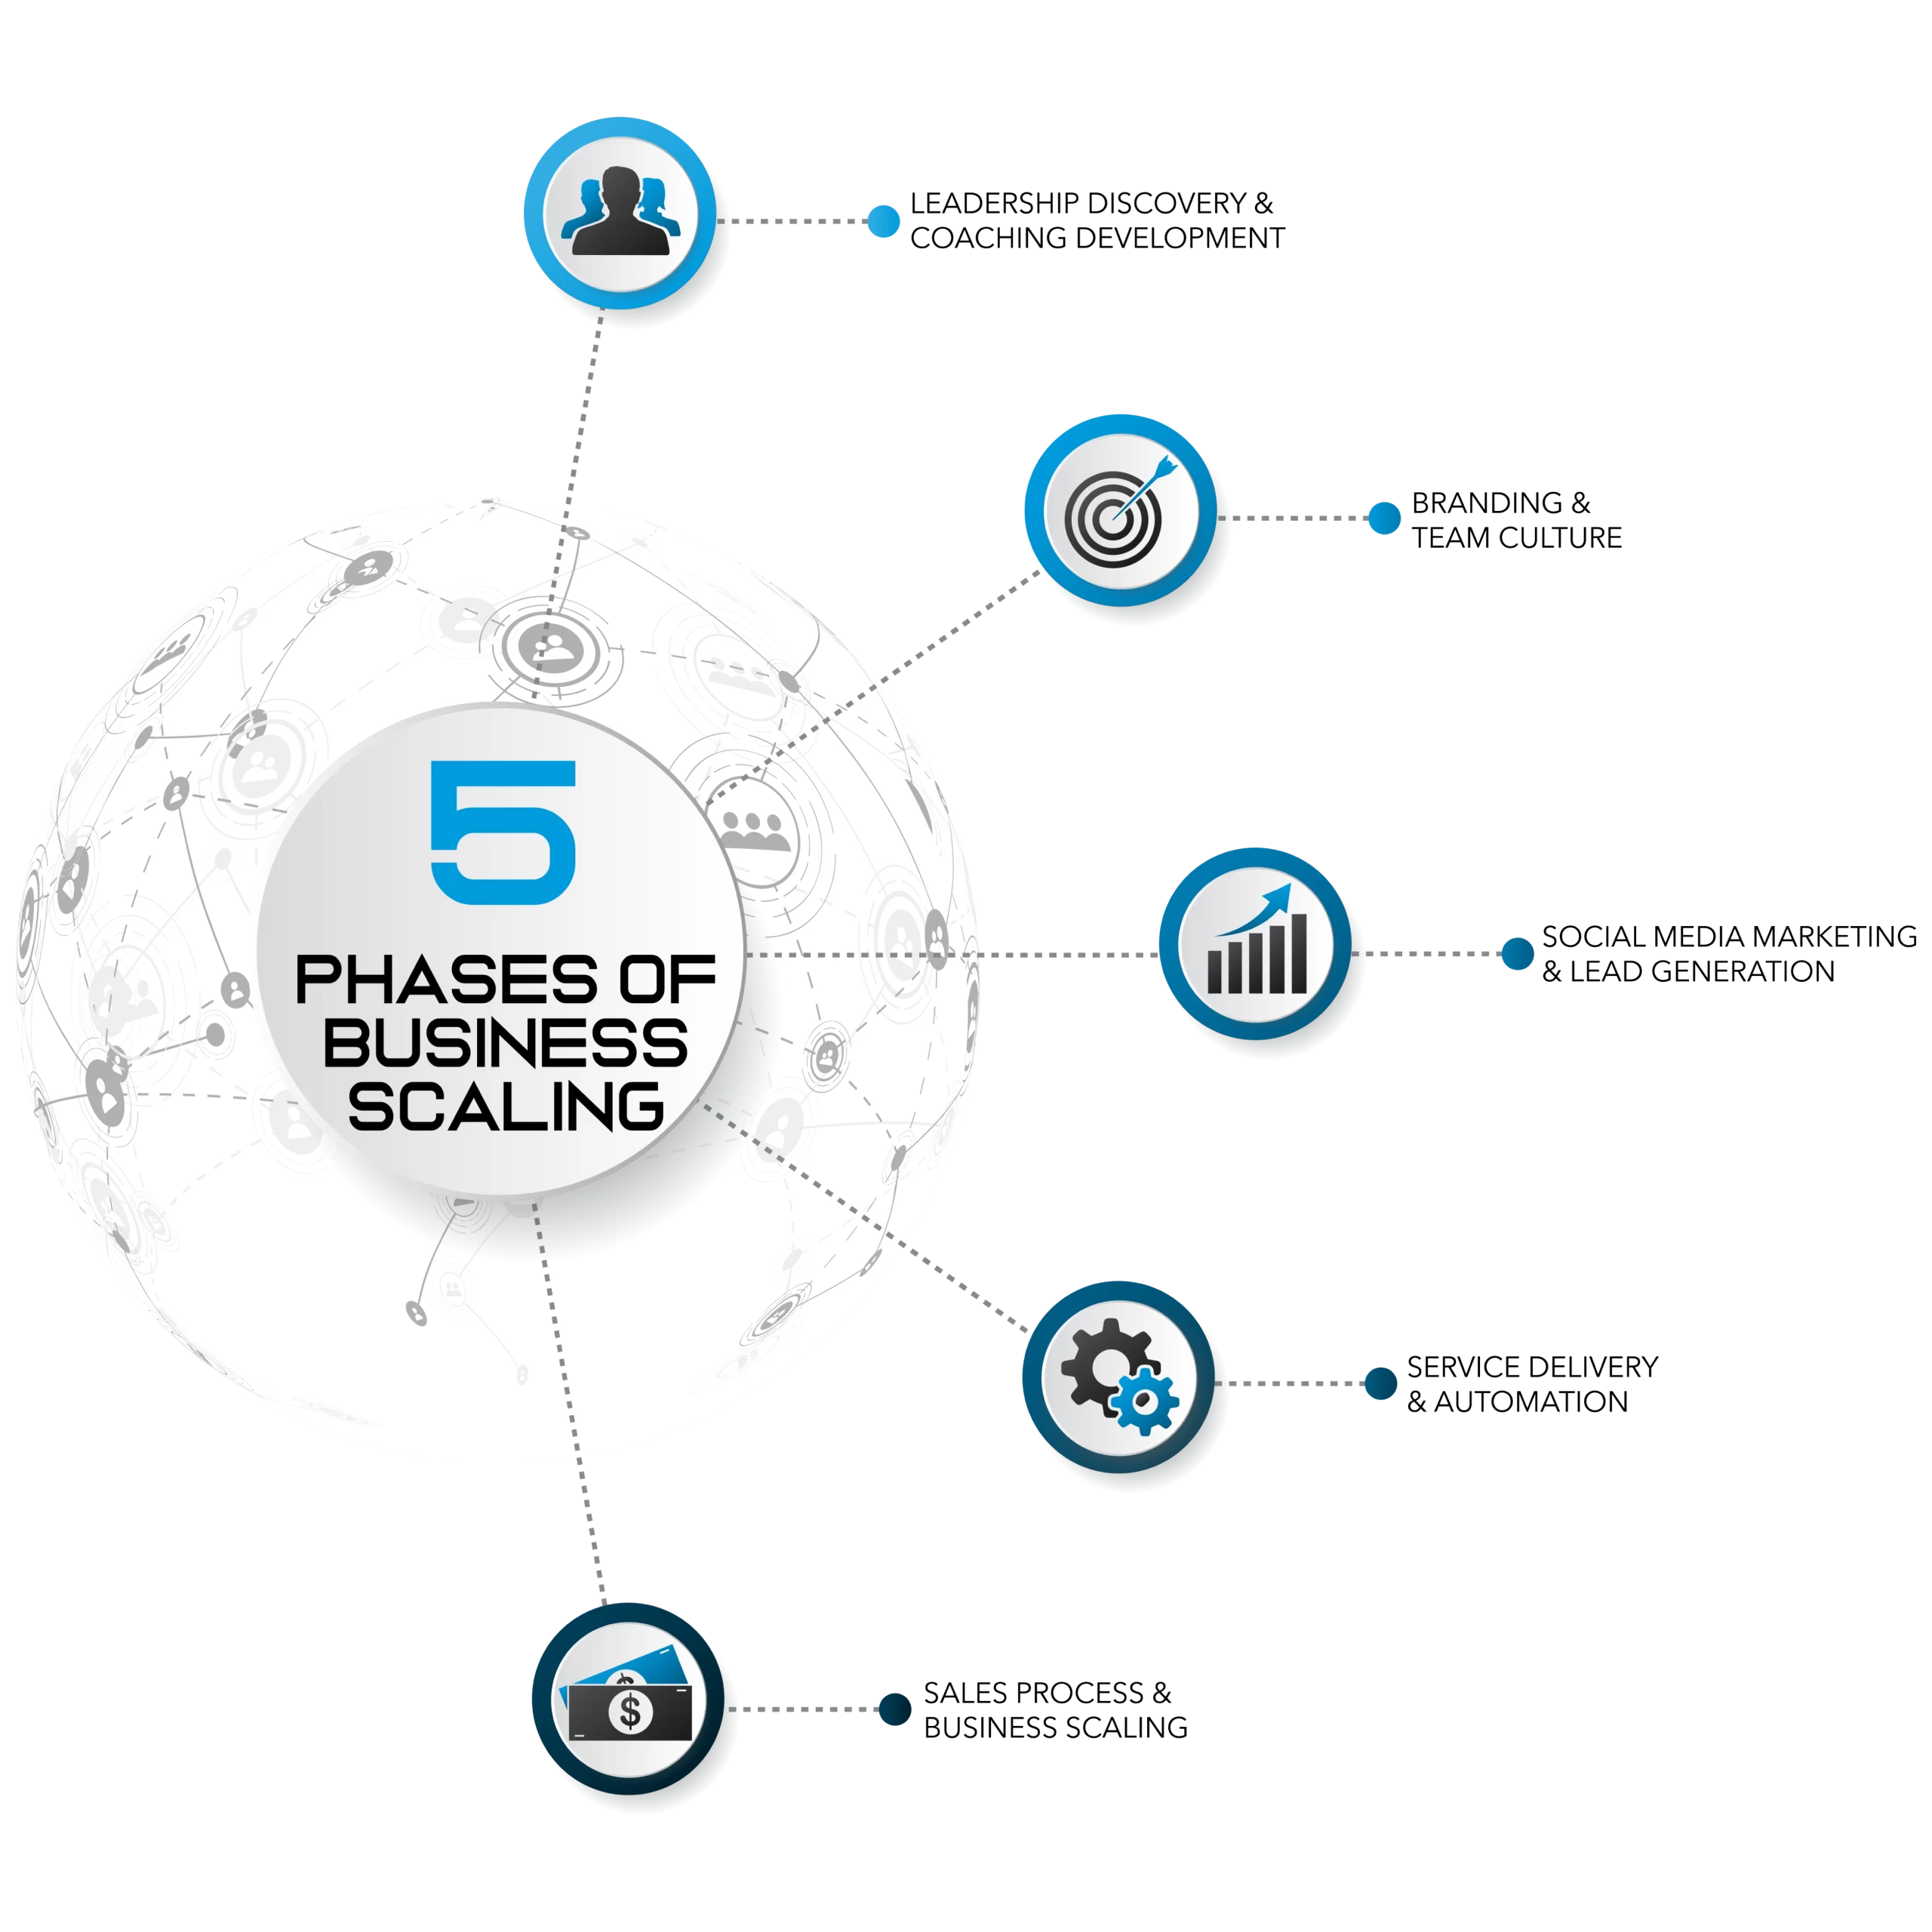 5 phases of business web